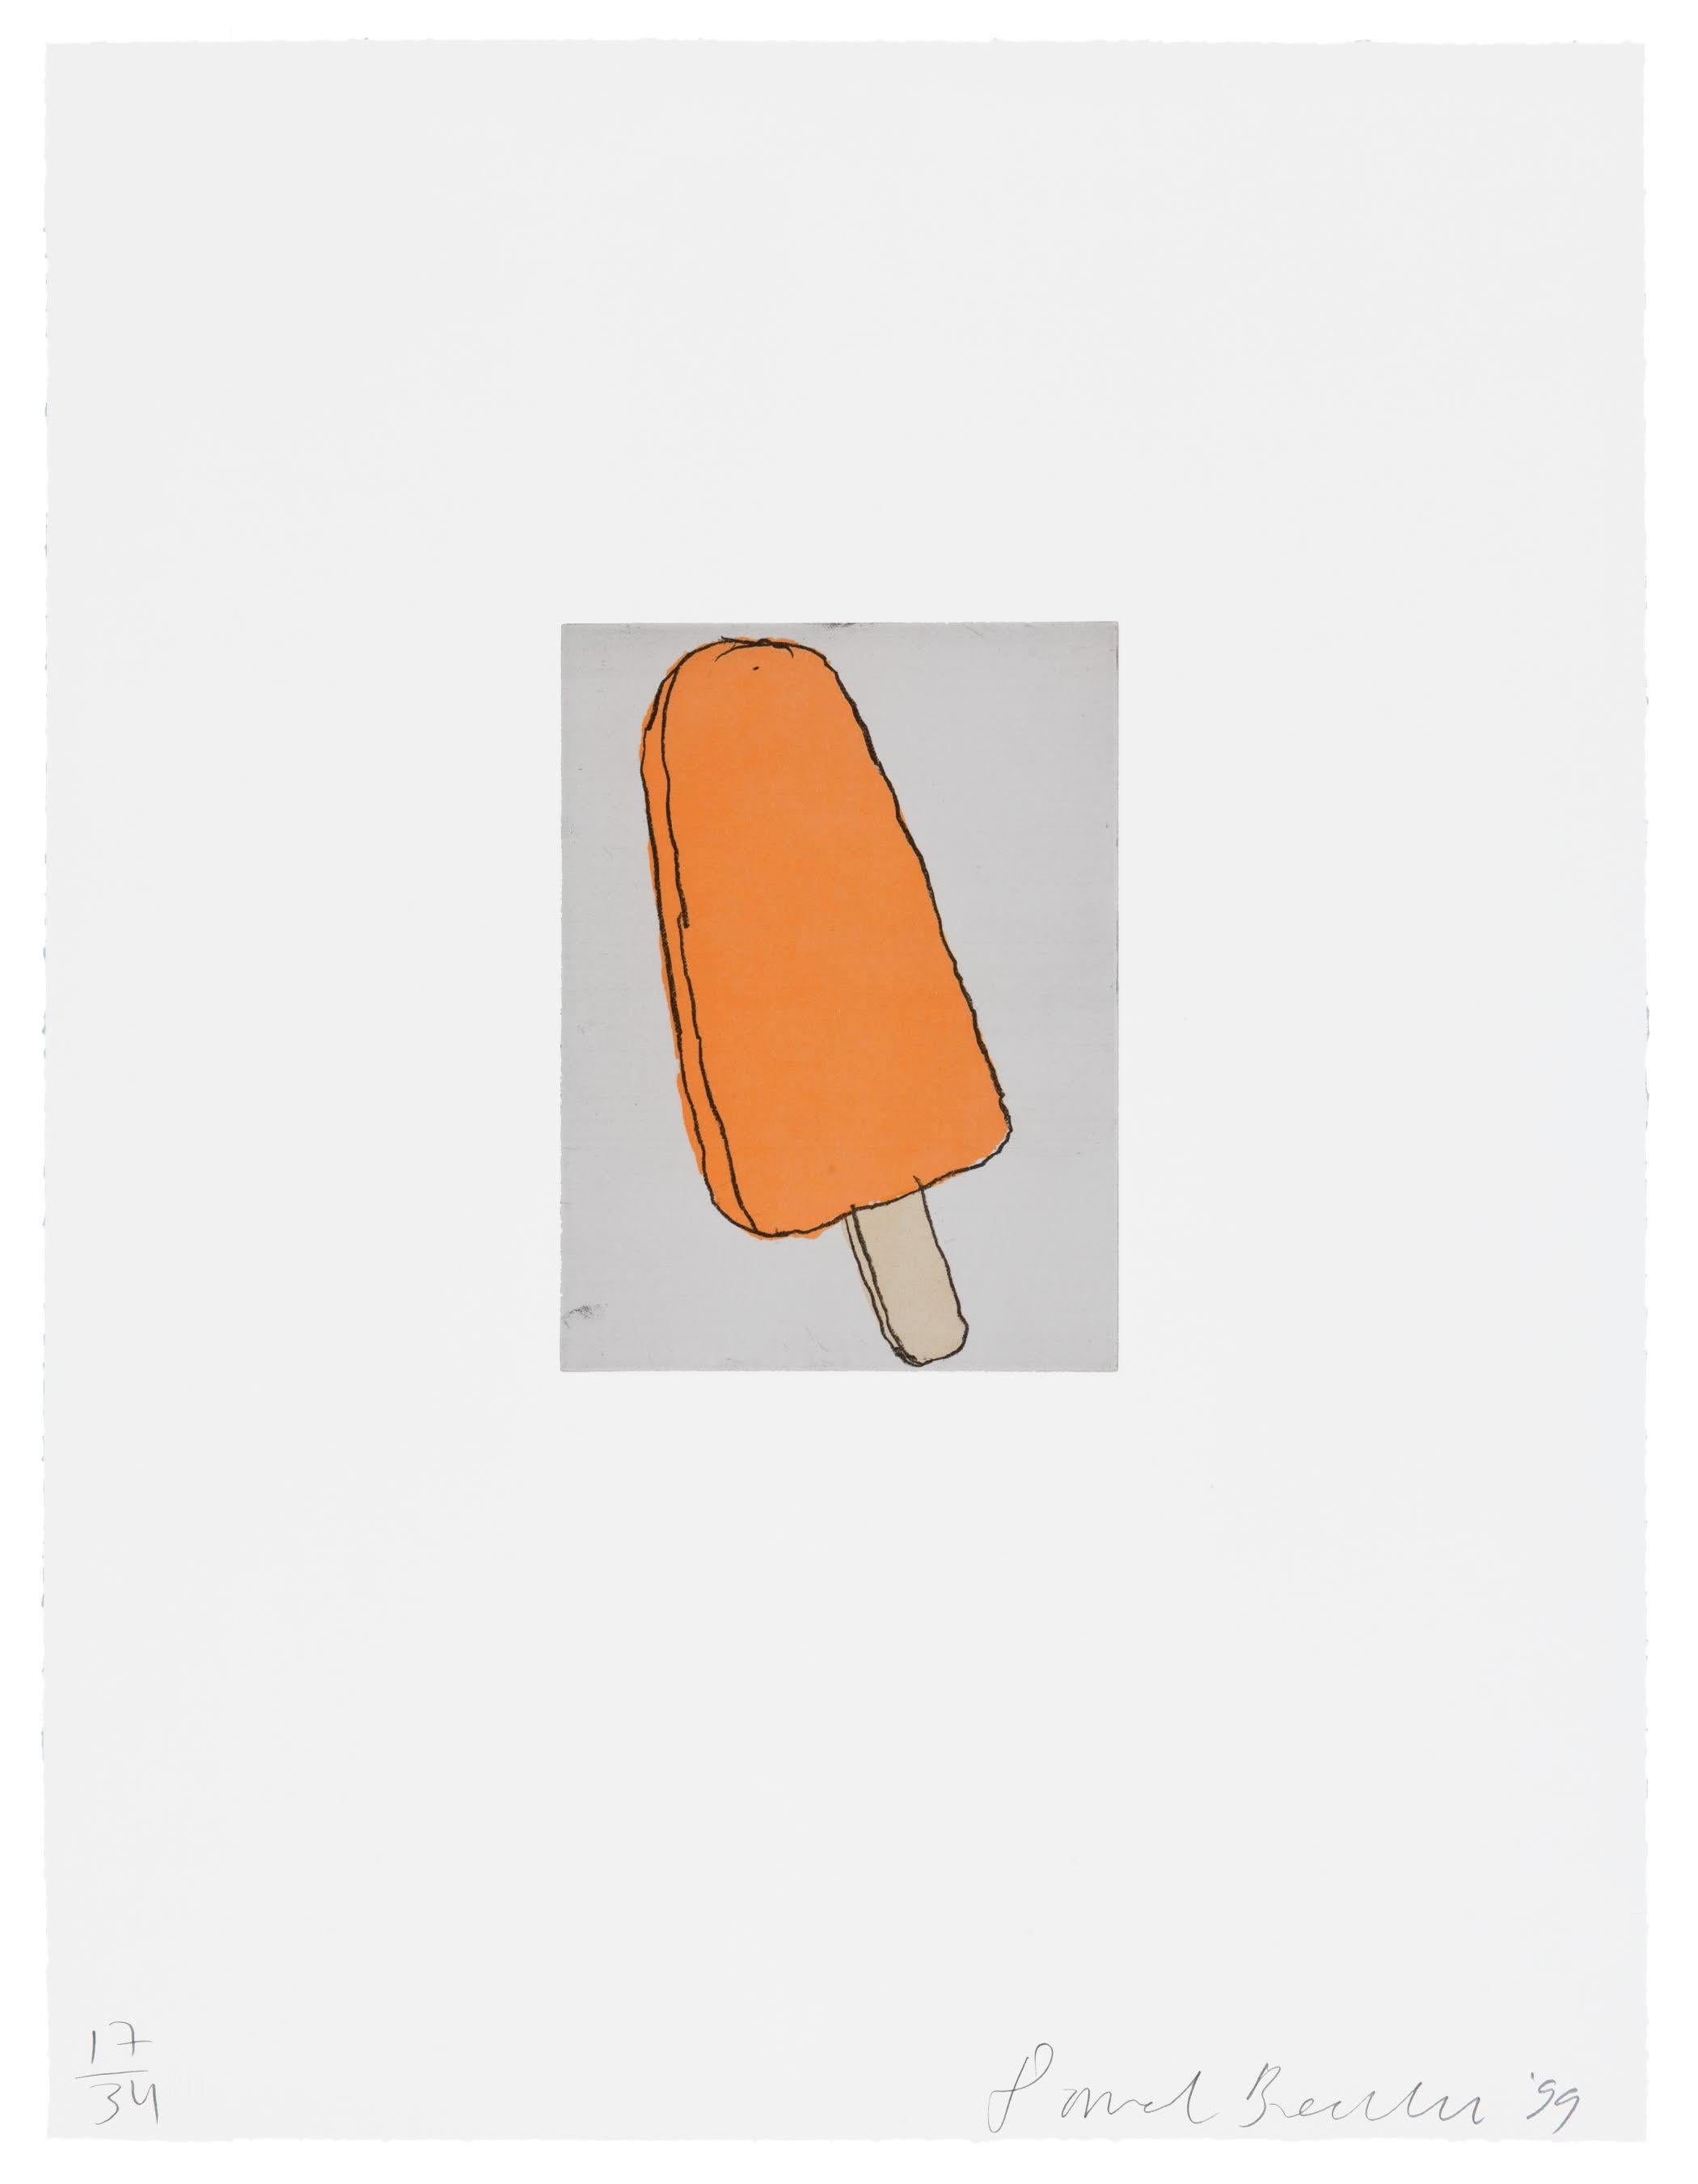 Donald Baechler, Creamsicle, 1999:
A fun, whimsical, and highly decorative signed limited edition Baechler piece that works well in any setting.  

Medium: Soft-ground etching and aquatint on Magnani Pescia paper.
Sheet size: 22 x 17 inches
Hand